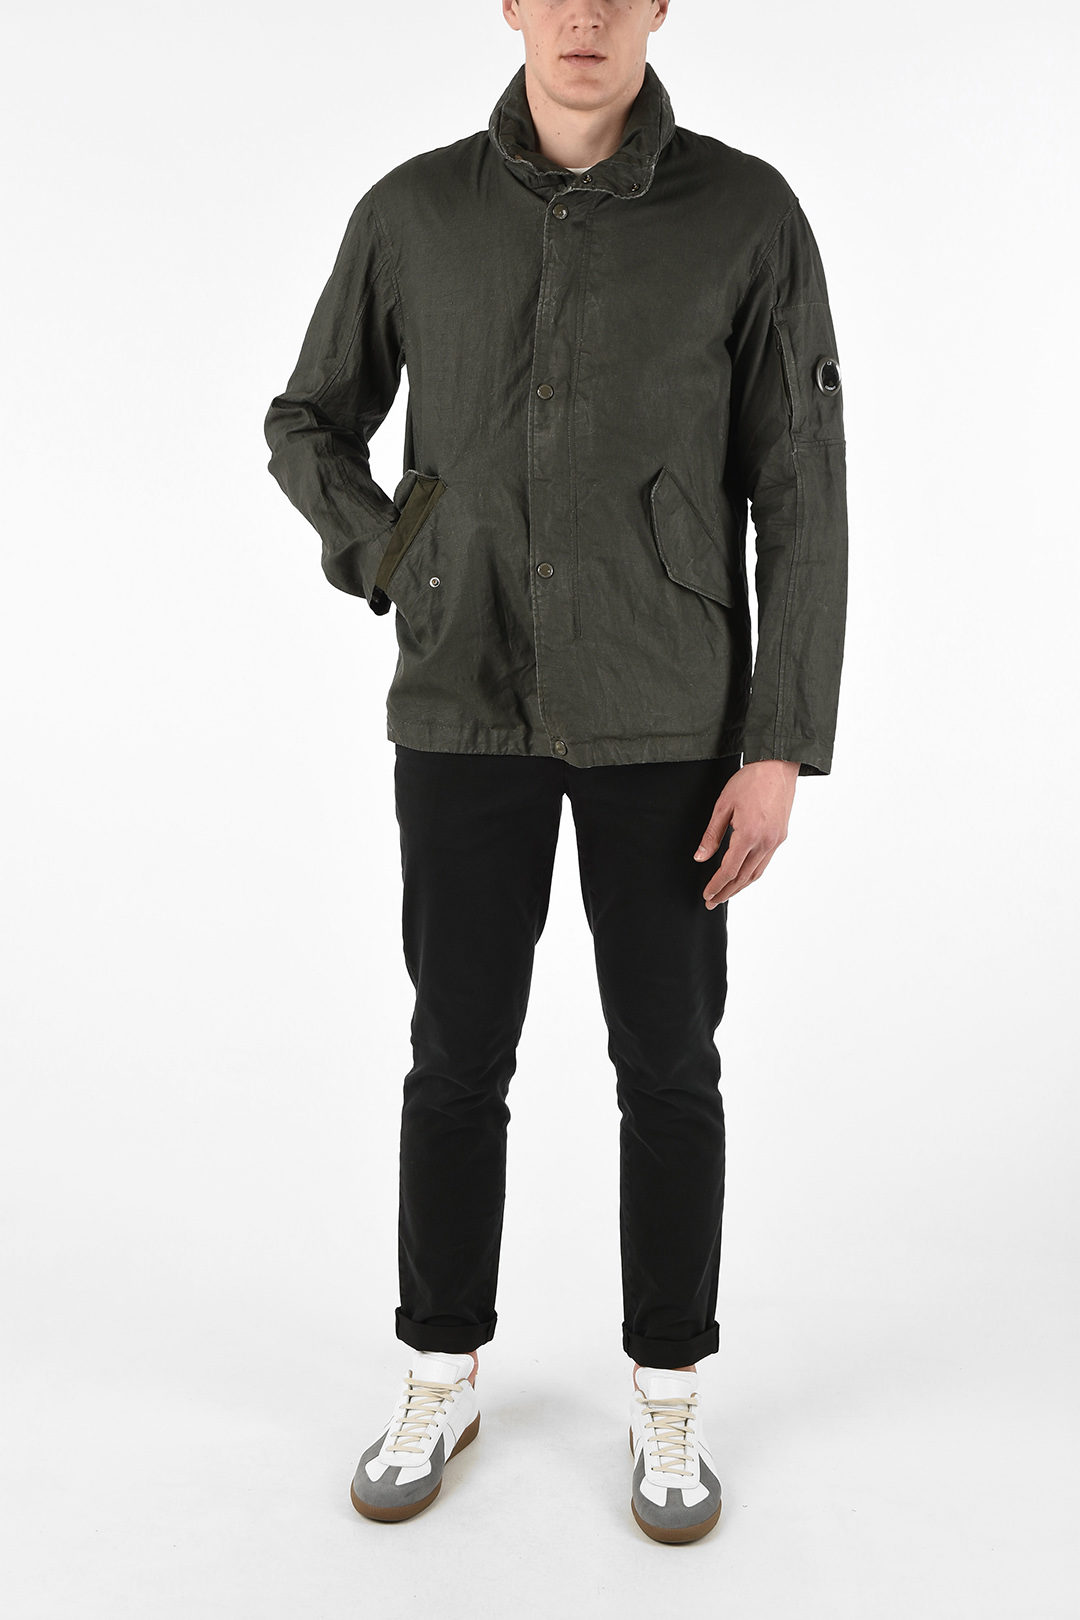 CP Company flax jacket with Extractable Hood men - Glamood Outlet